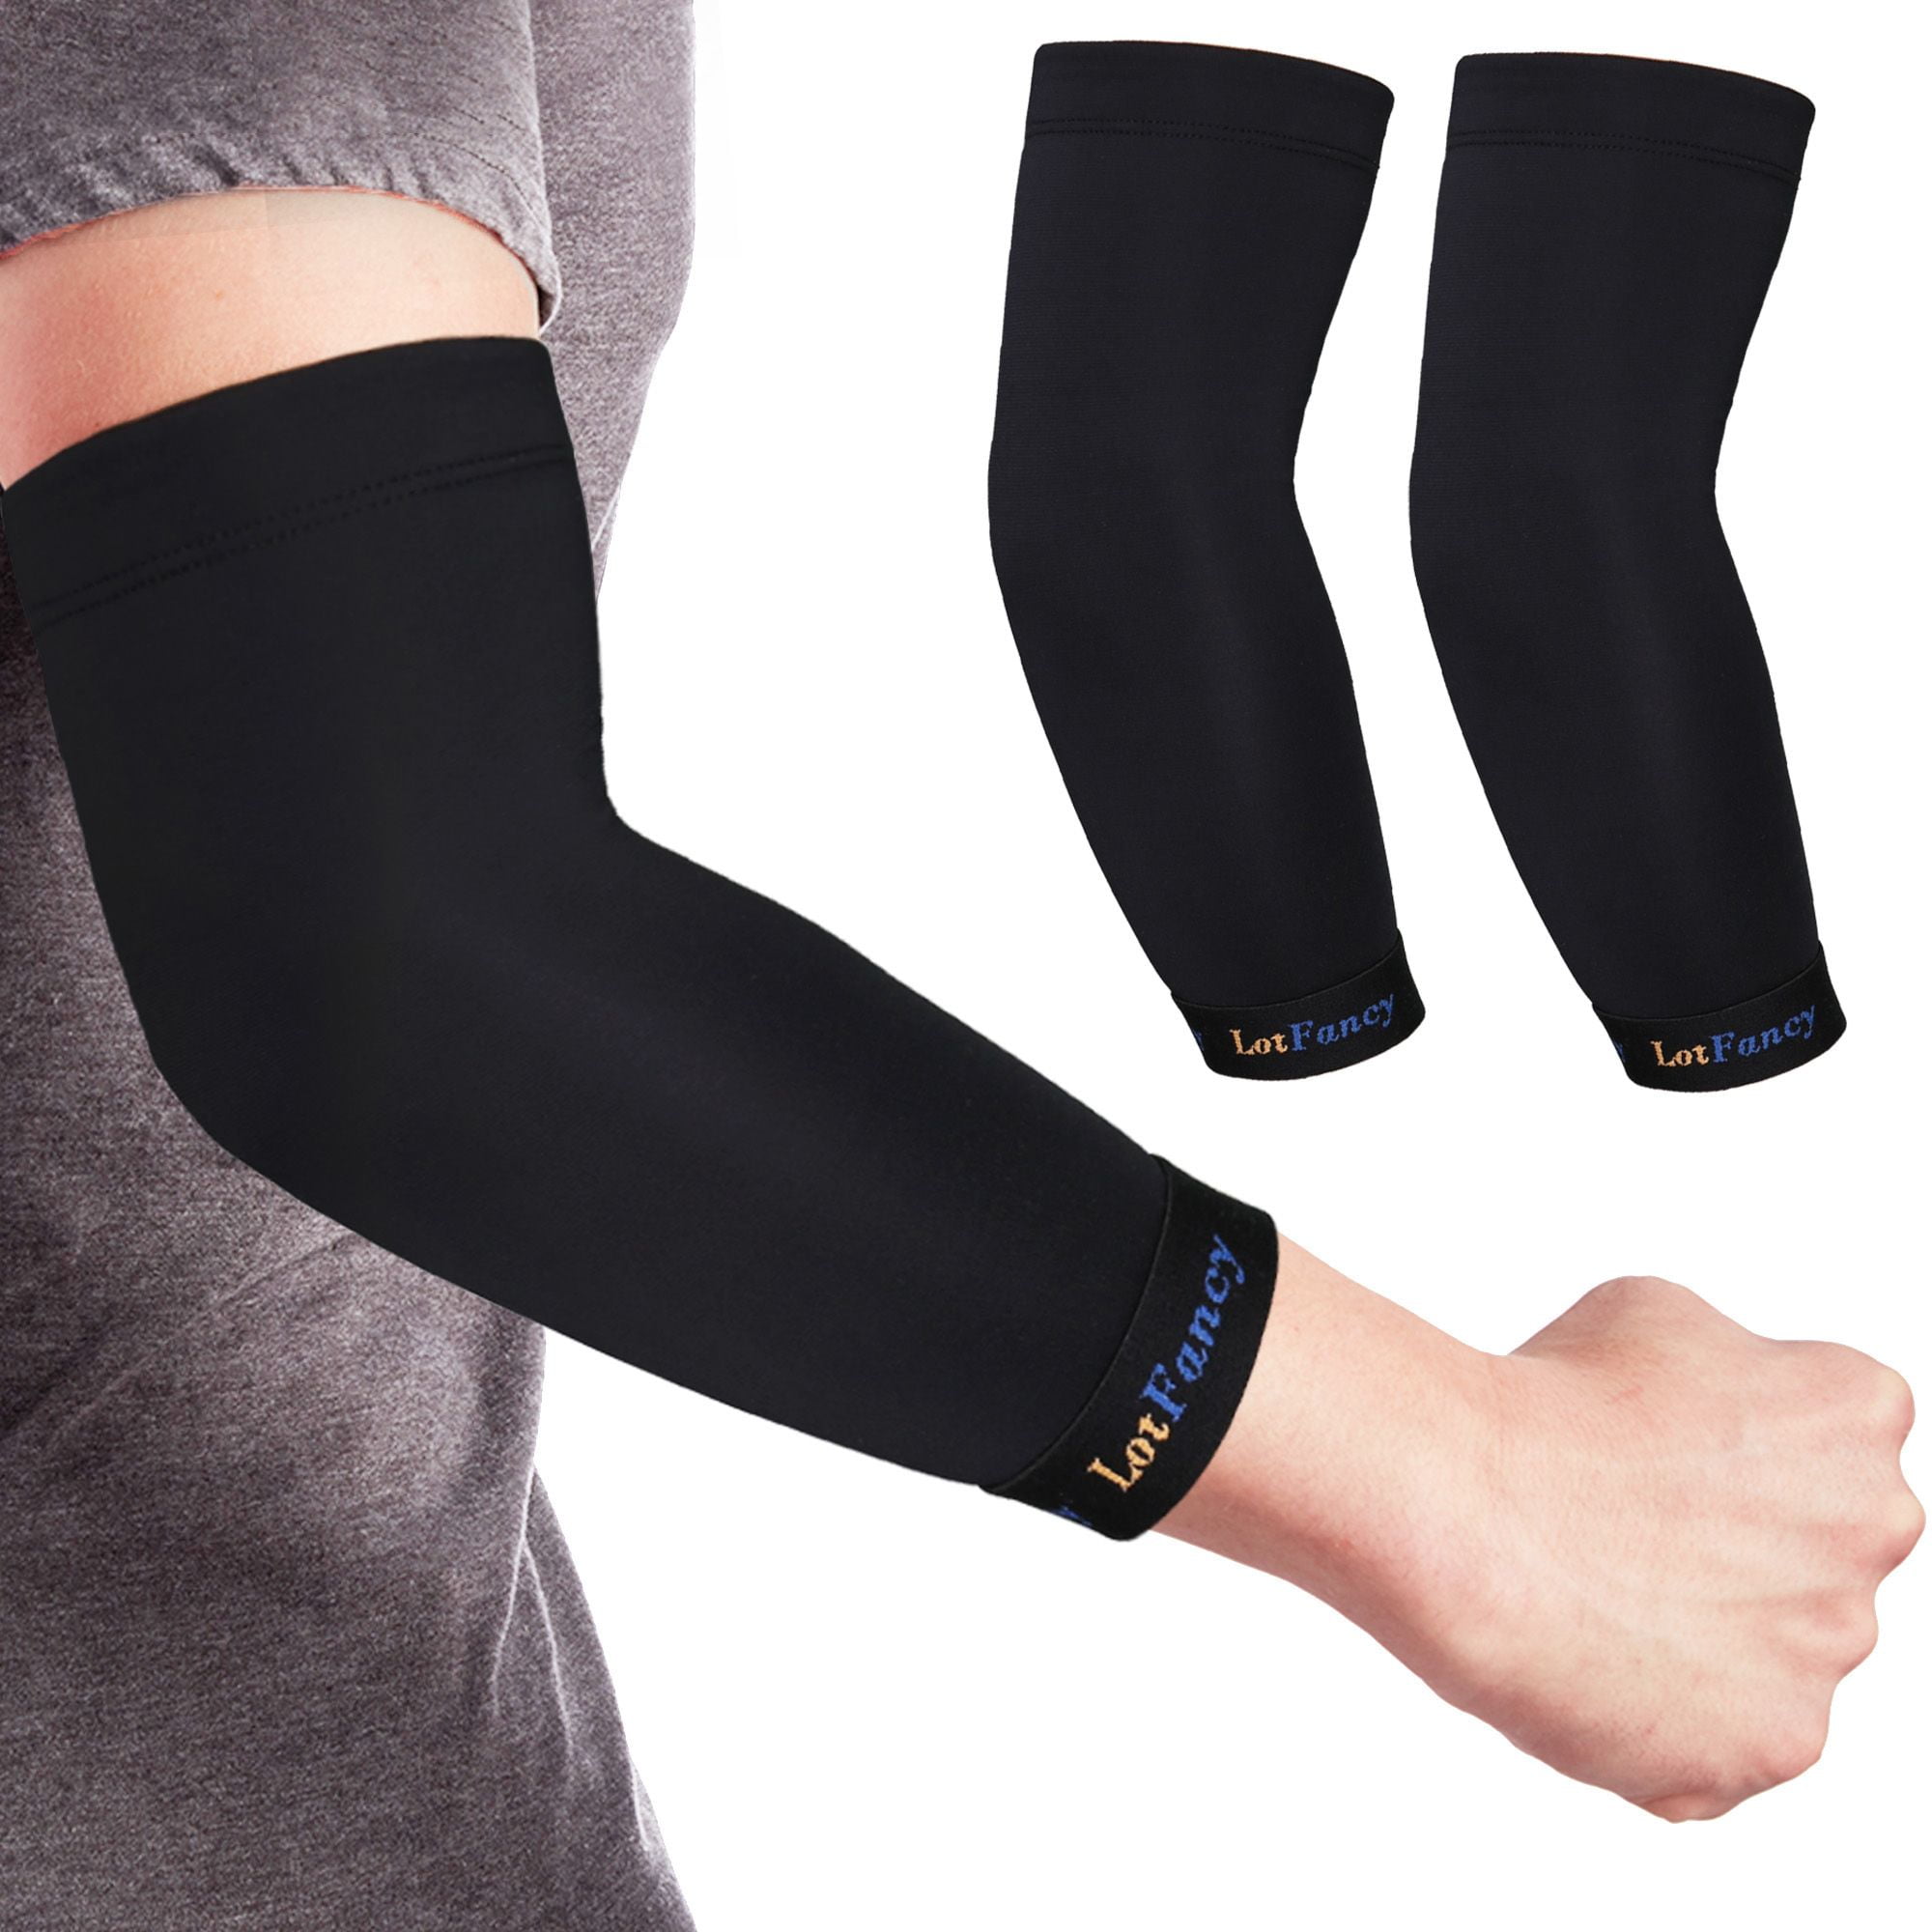 Premium Pro 88% Copper Infused Compression ELBOW Brace Sleeve for Fitness/Sports 